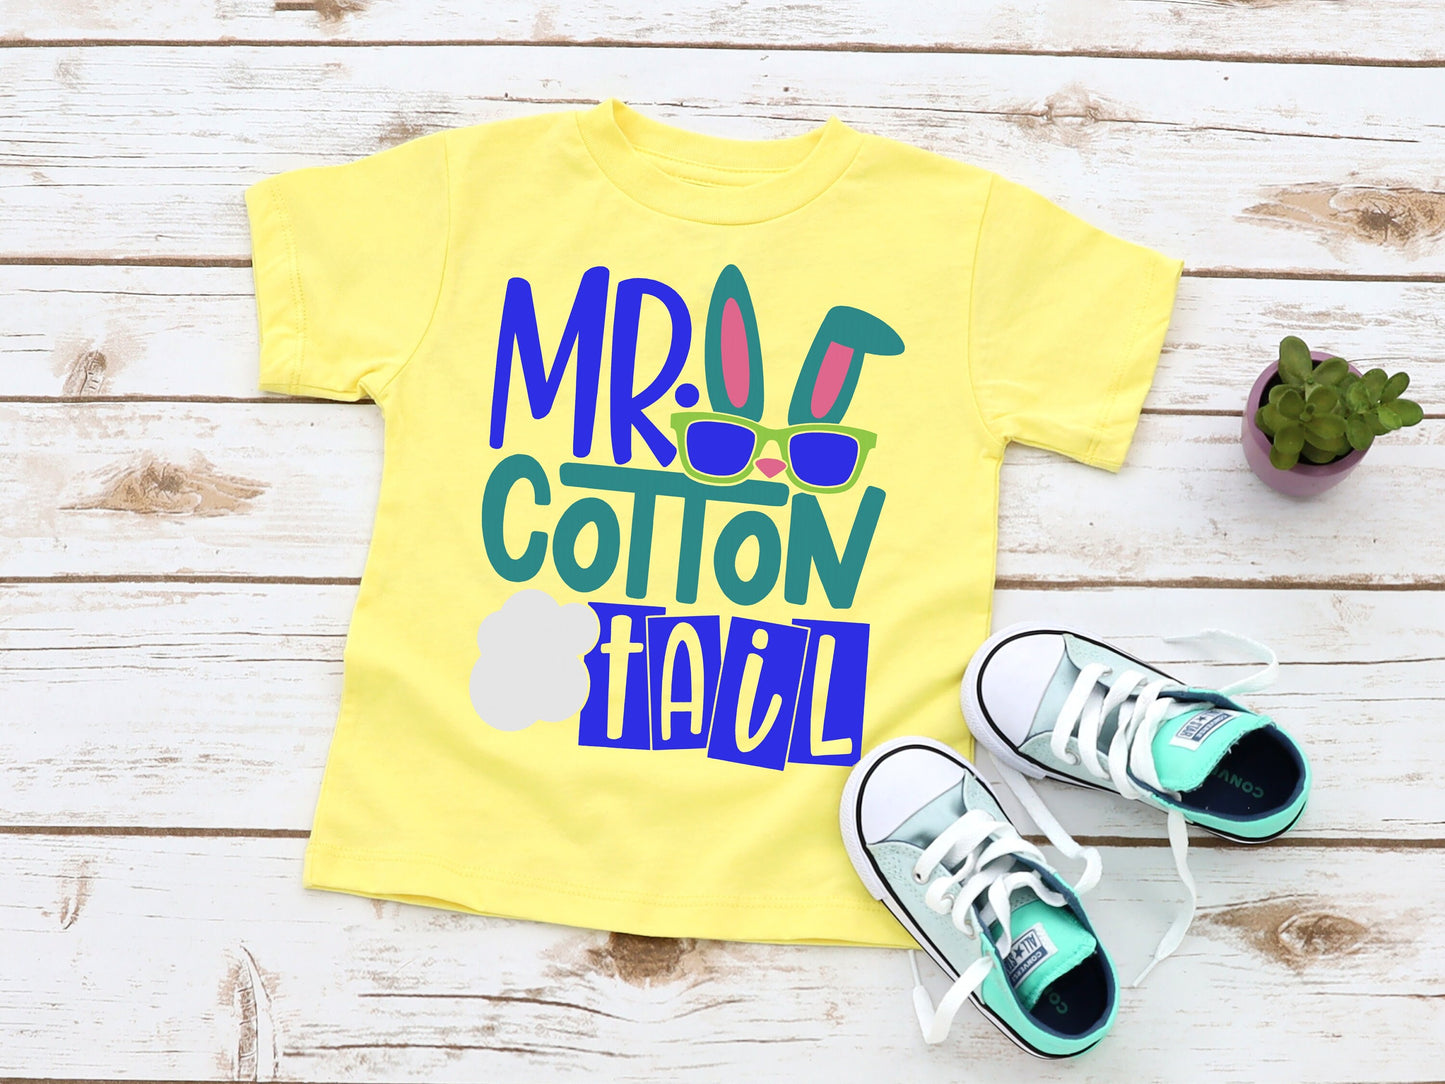 Mr Cotton Tail Infant or Toddler Easter Shirt - Boys Easter Shirt - Boys Egg Hunt Shirt - Kids Easter Shirt - Egg Hunt Outfit - First Easter